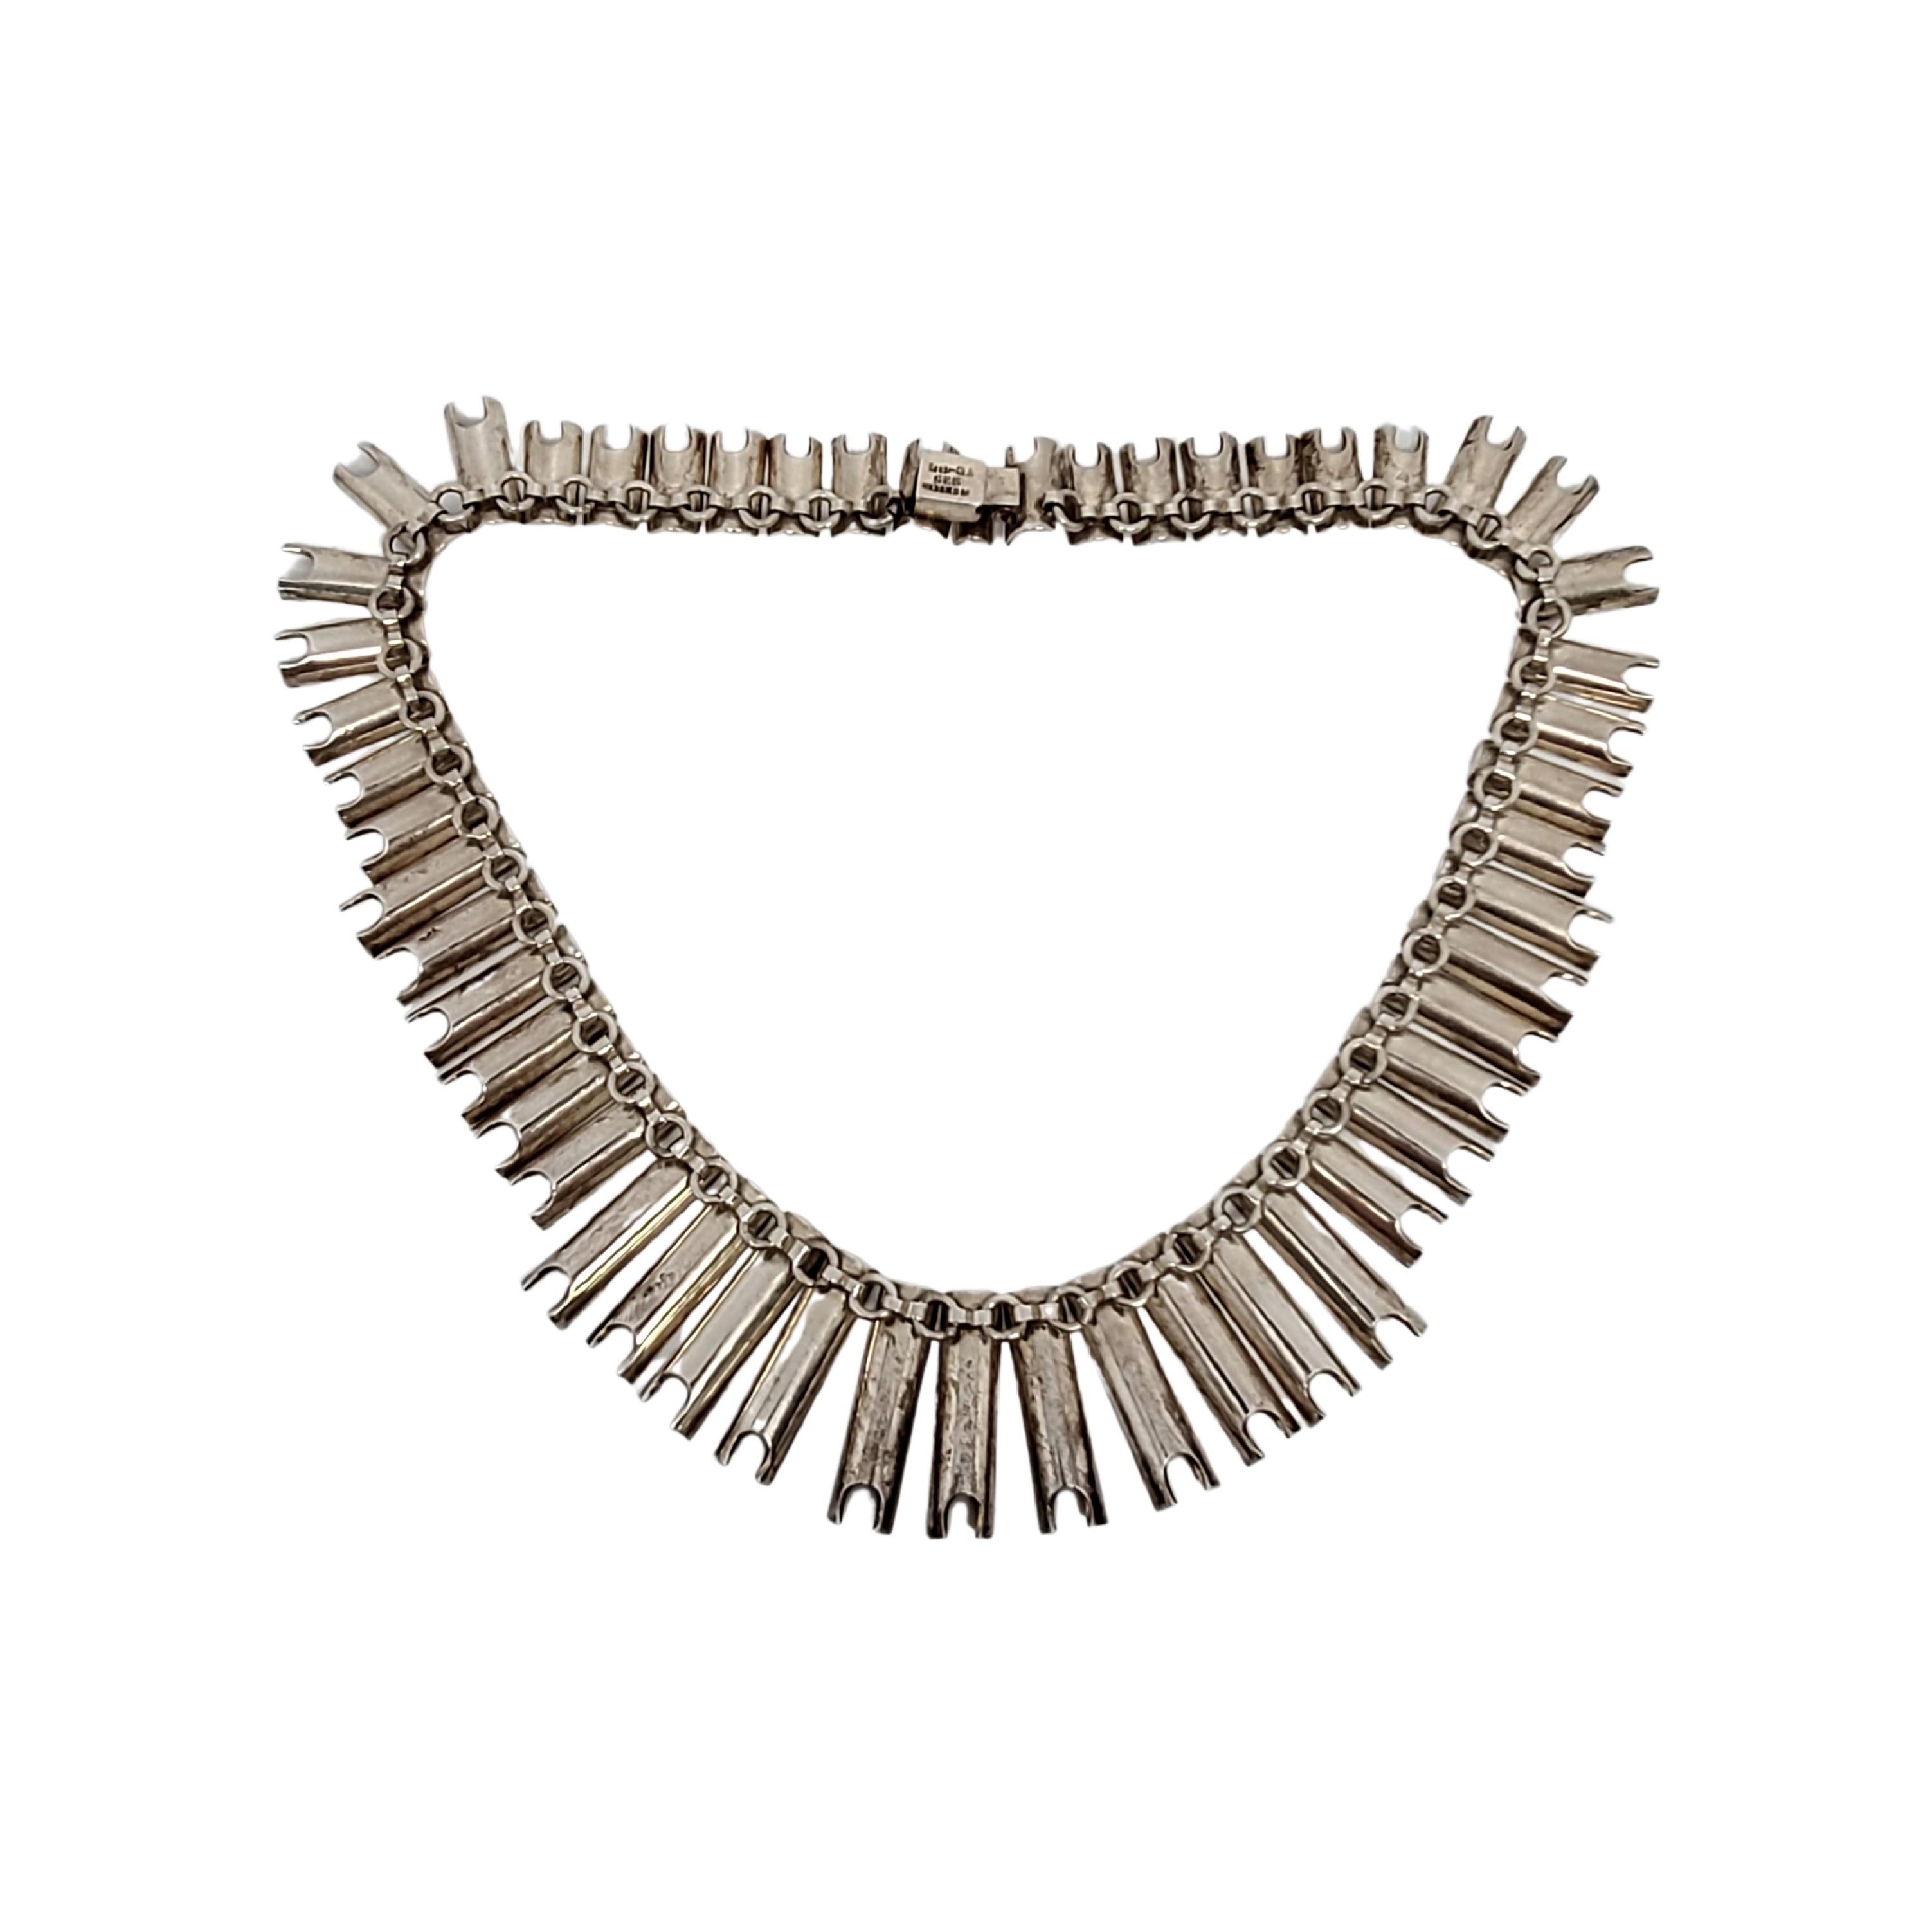 Sterling silver concave graduated link necklace by Taxco Mexico artisan TB-84.

Heavy and substantial necklace features concave links in graduated sizing with the longest links at the center, tapering to shorter links as the move to the ends. Slide